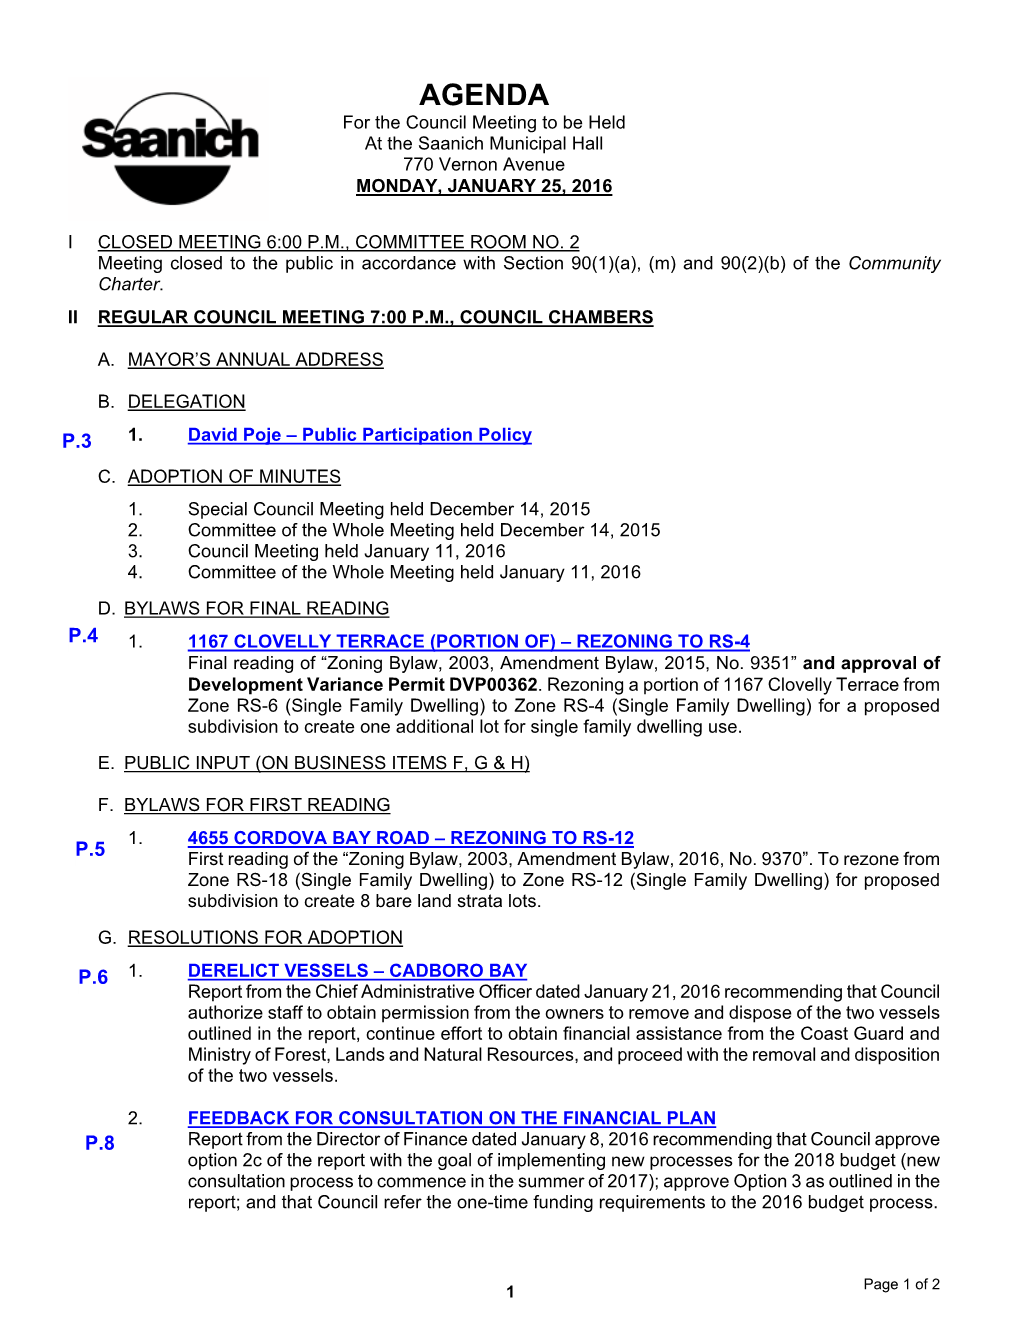 AGENDA for the Council Meeting to Be Held at the Saanich Municipal Hall 770 Vernon Avenue MONDAY, JANUARY 25, 2016